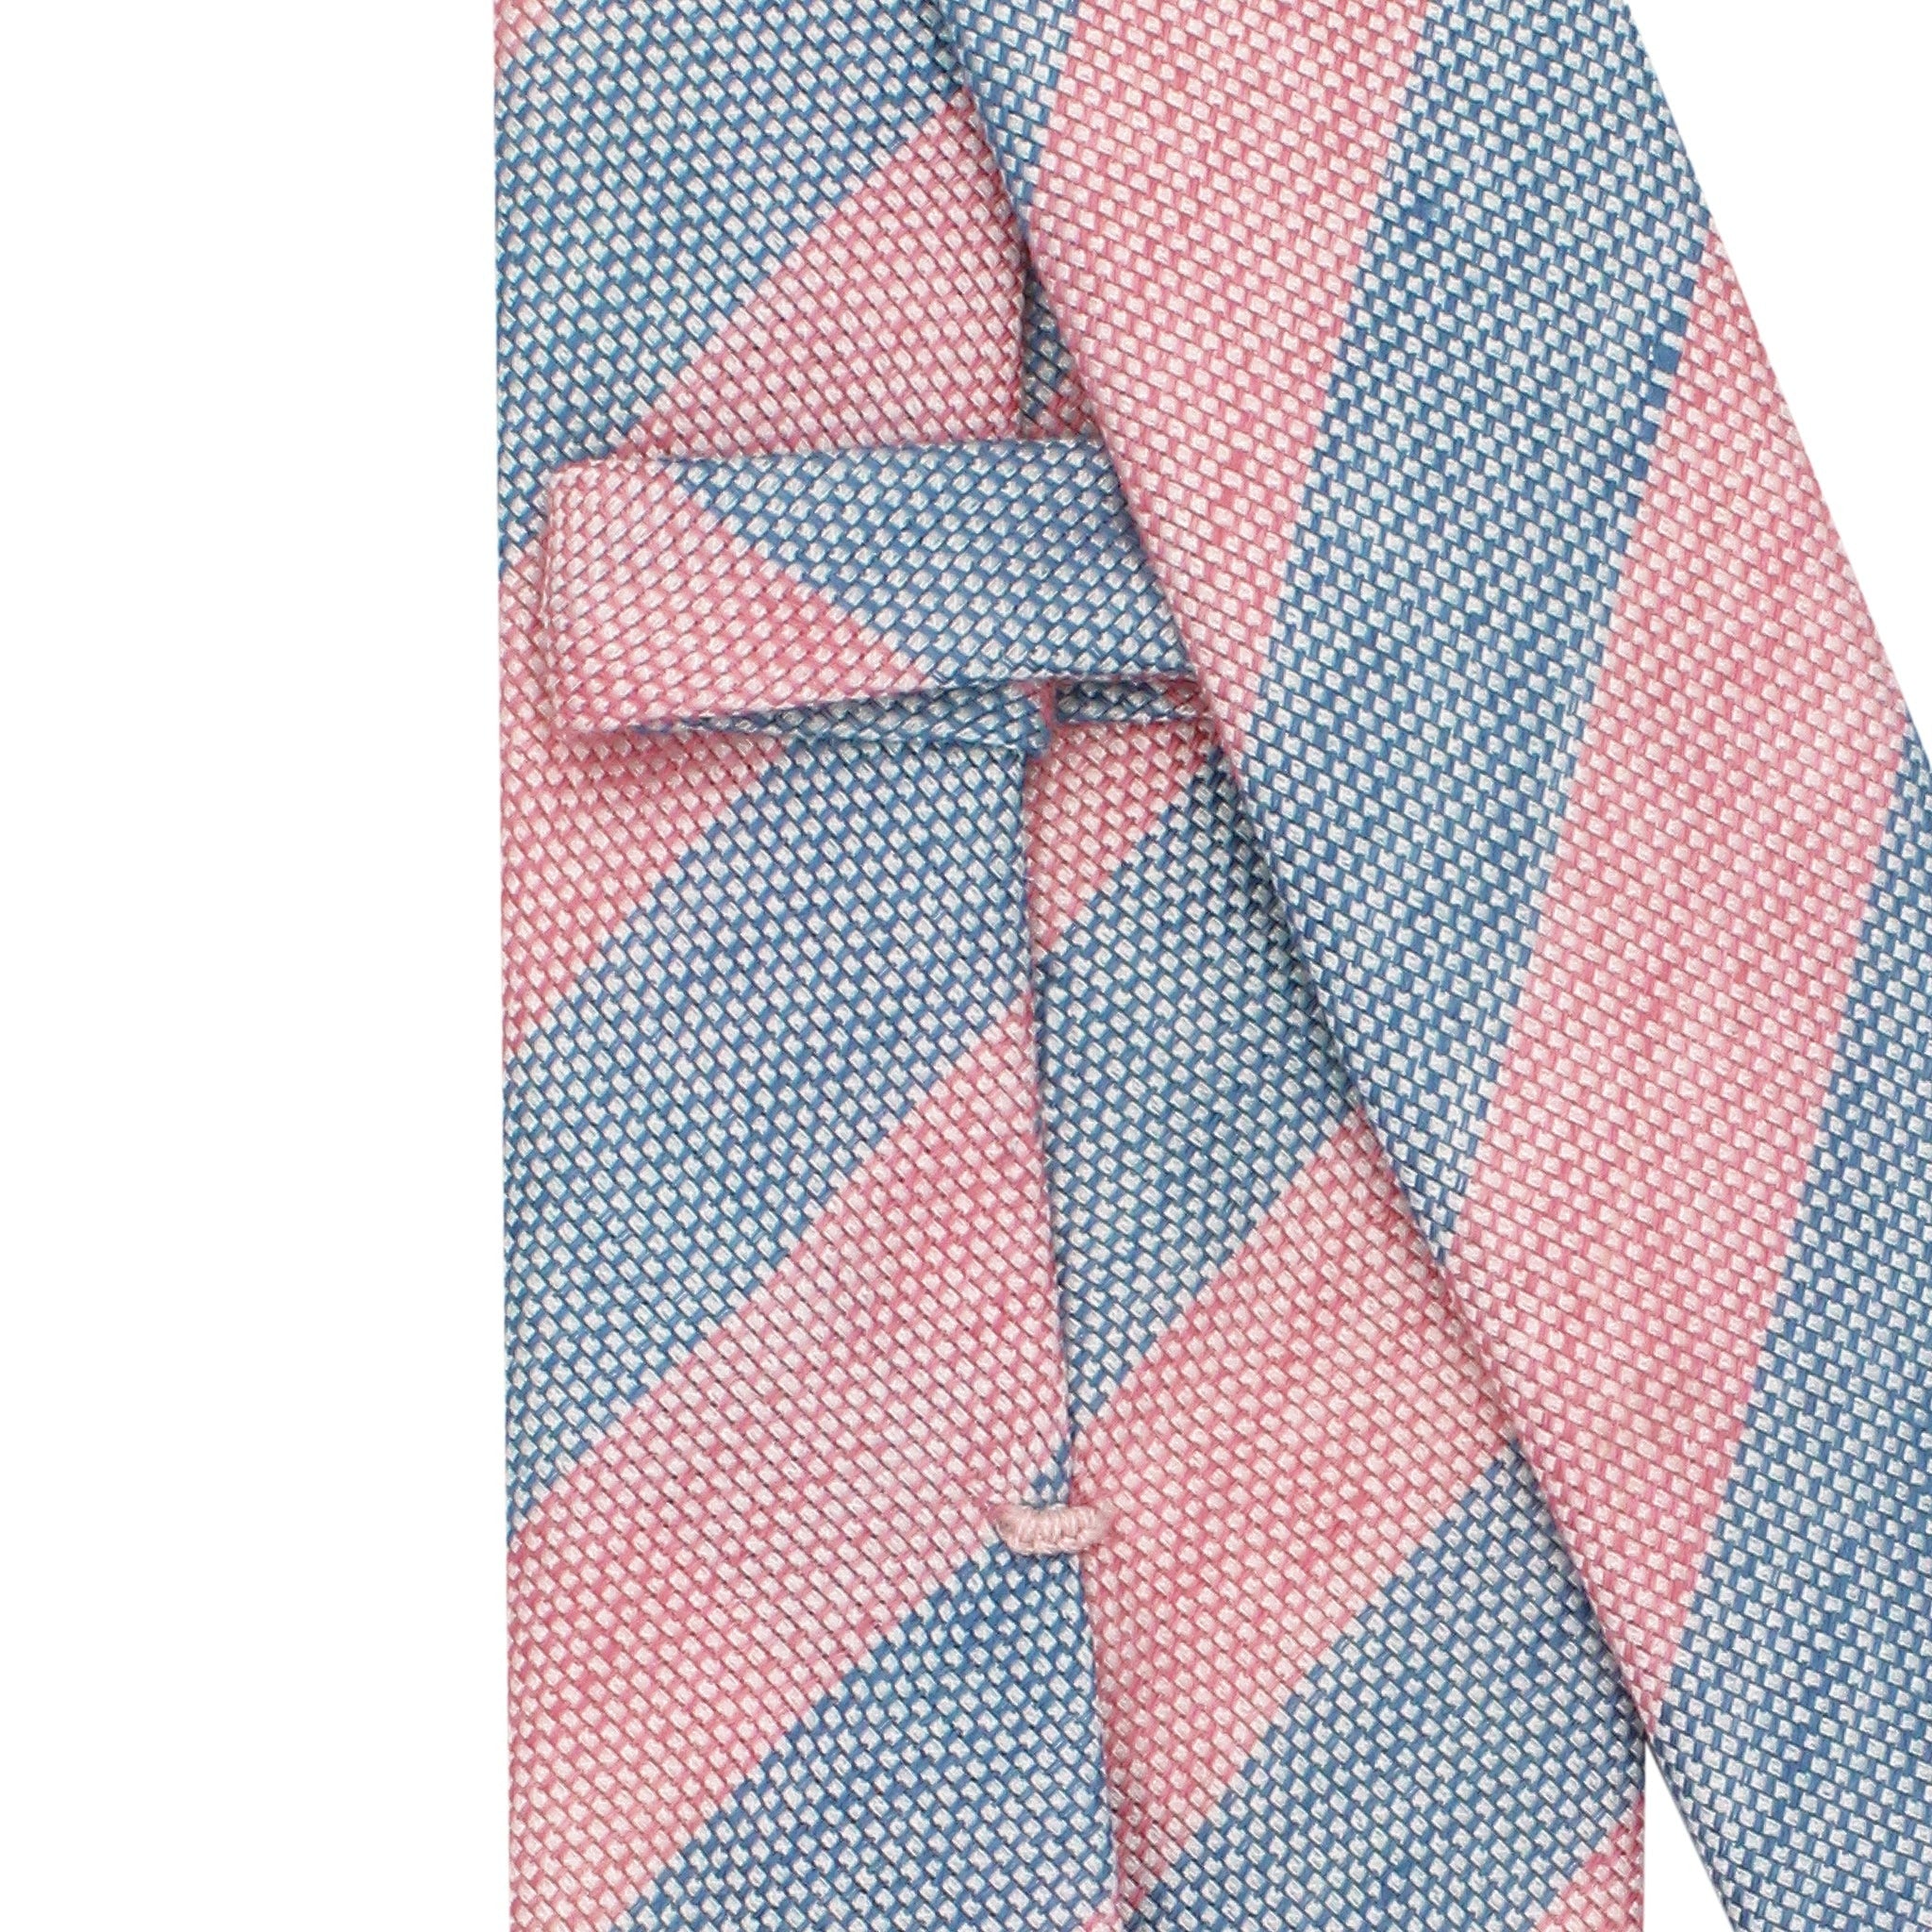 Anversa linen and cotton tie with light blue and pink bands